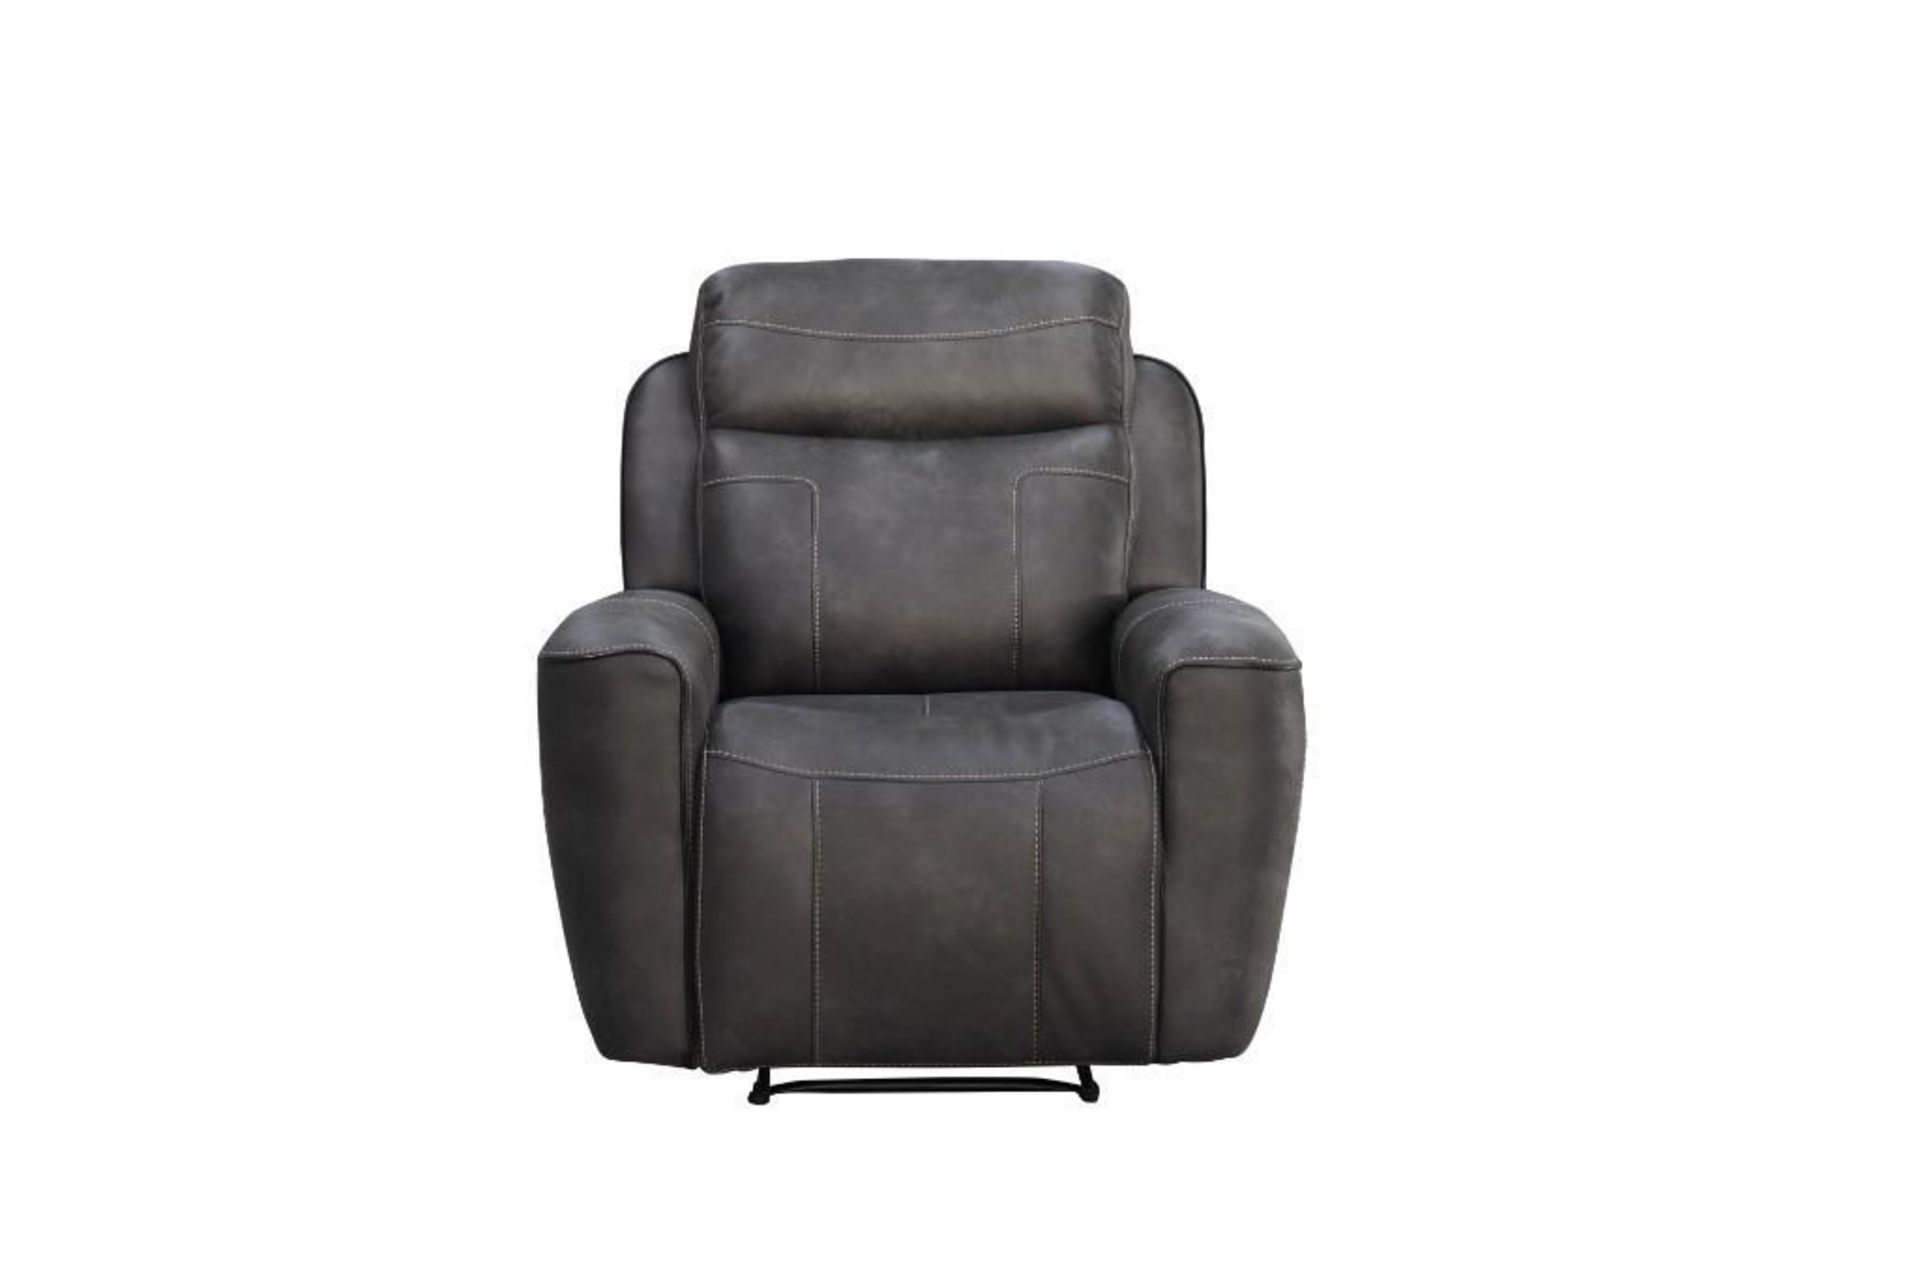 Brand new & Boxed Luxor Electric reclining fabric chair - Image 2 of 3